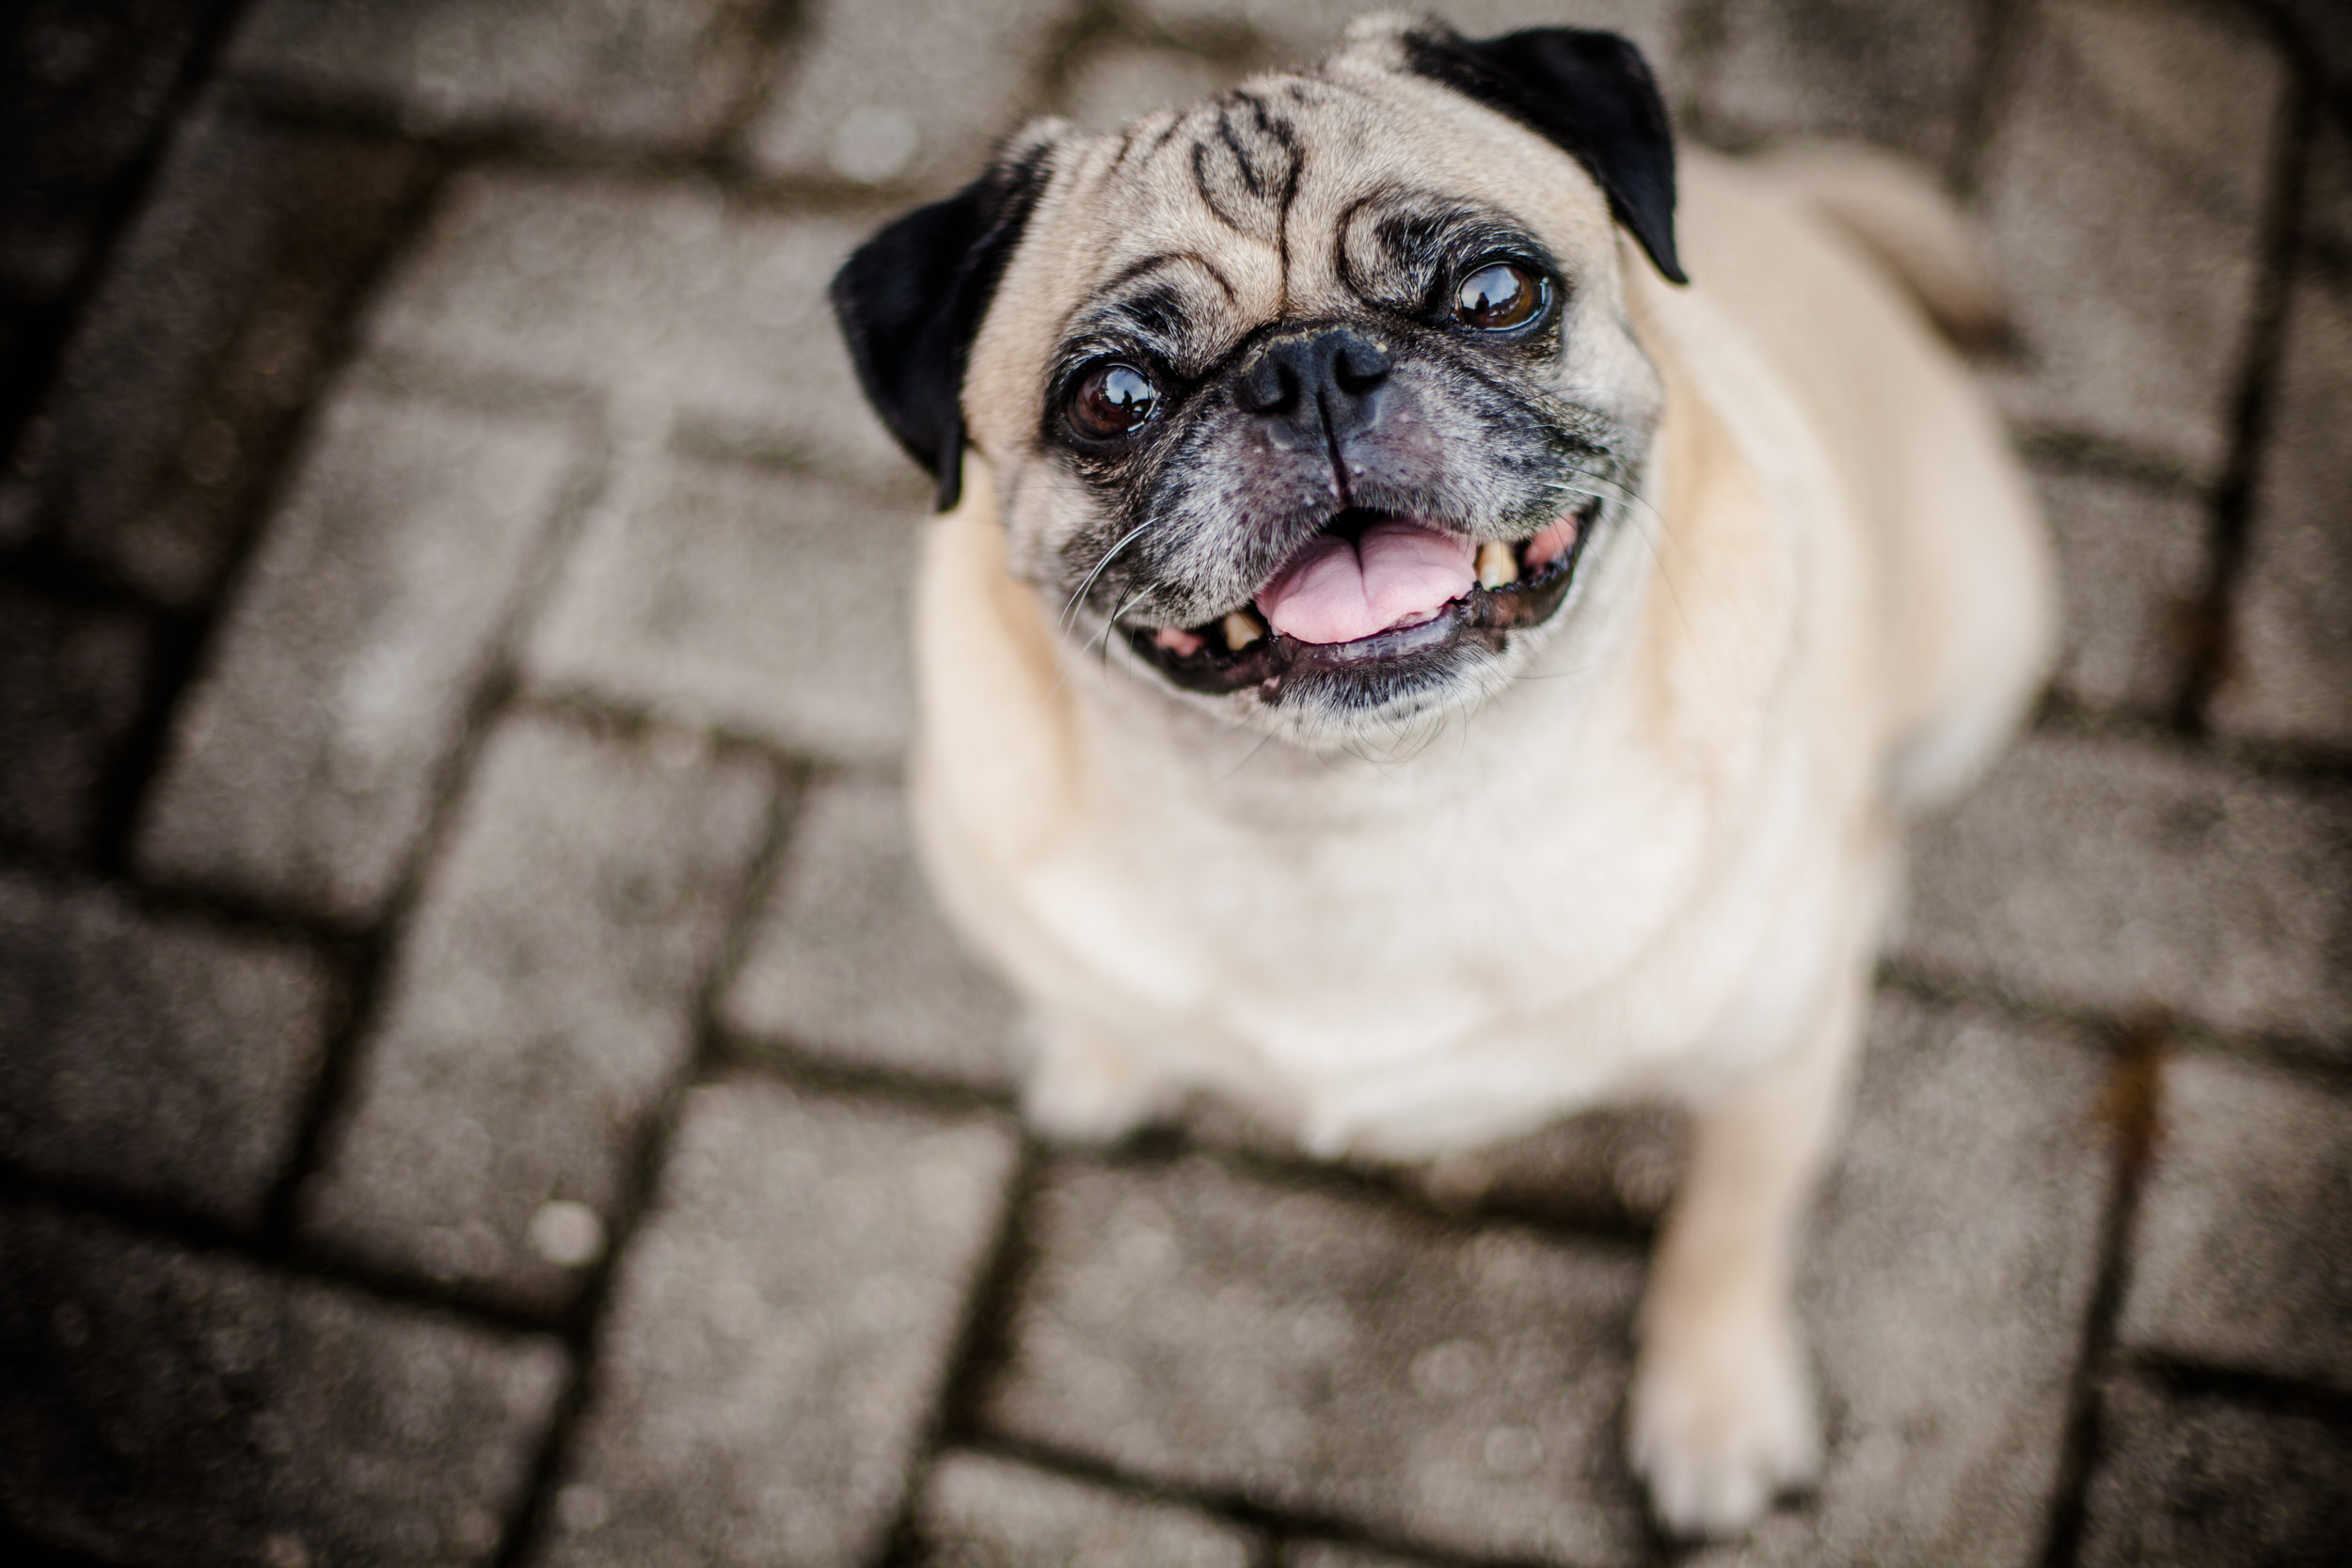 pug smiling up at the camera candidly